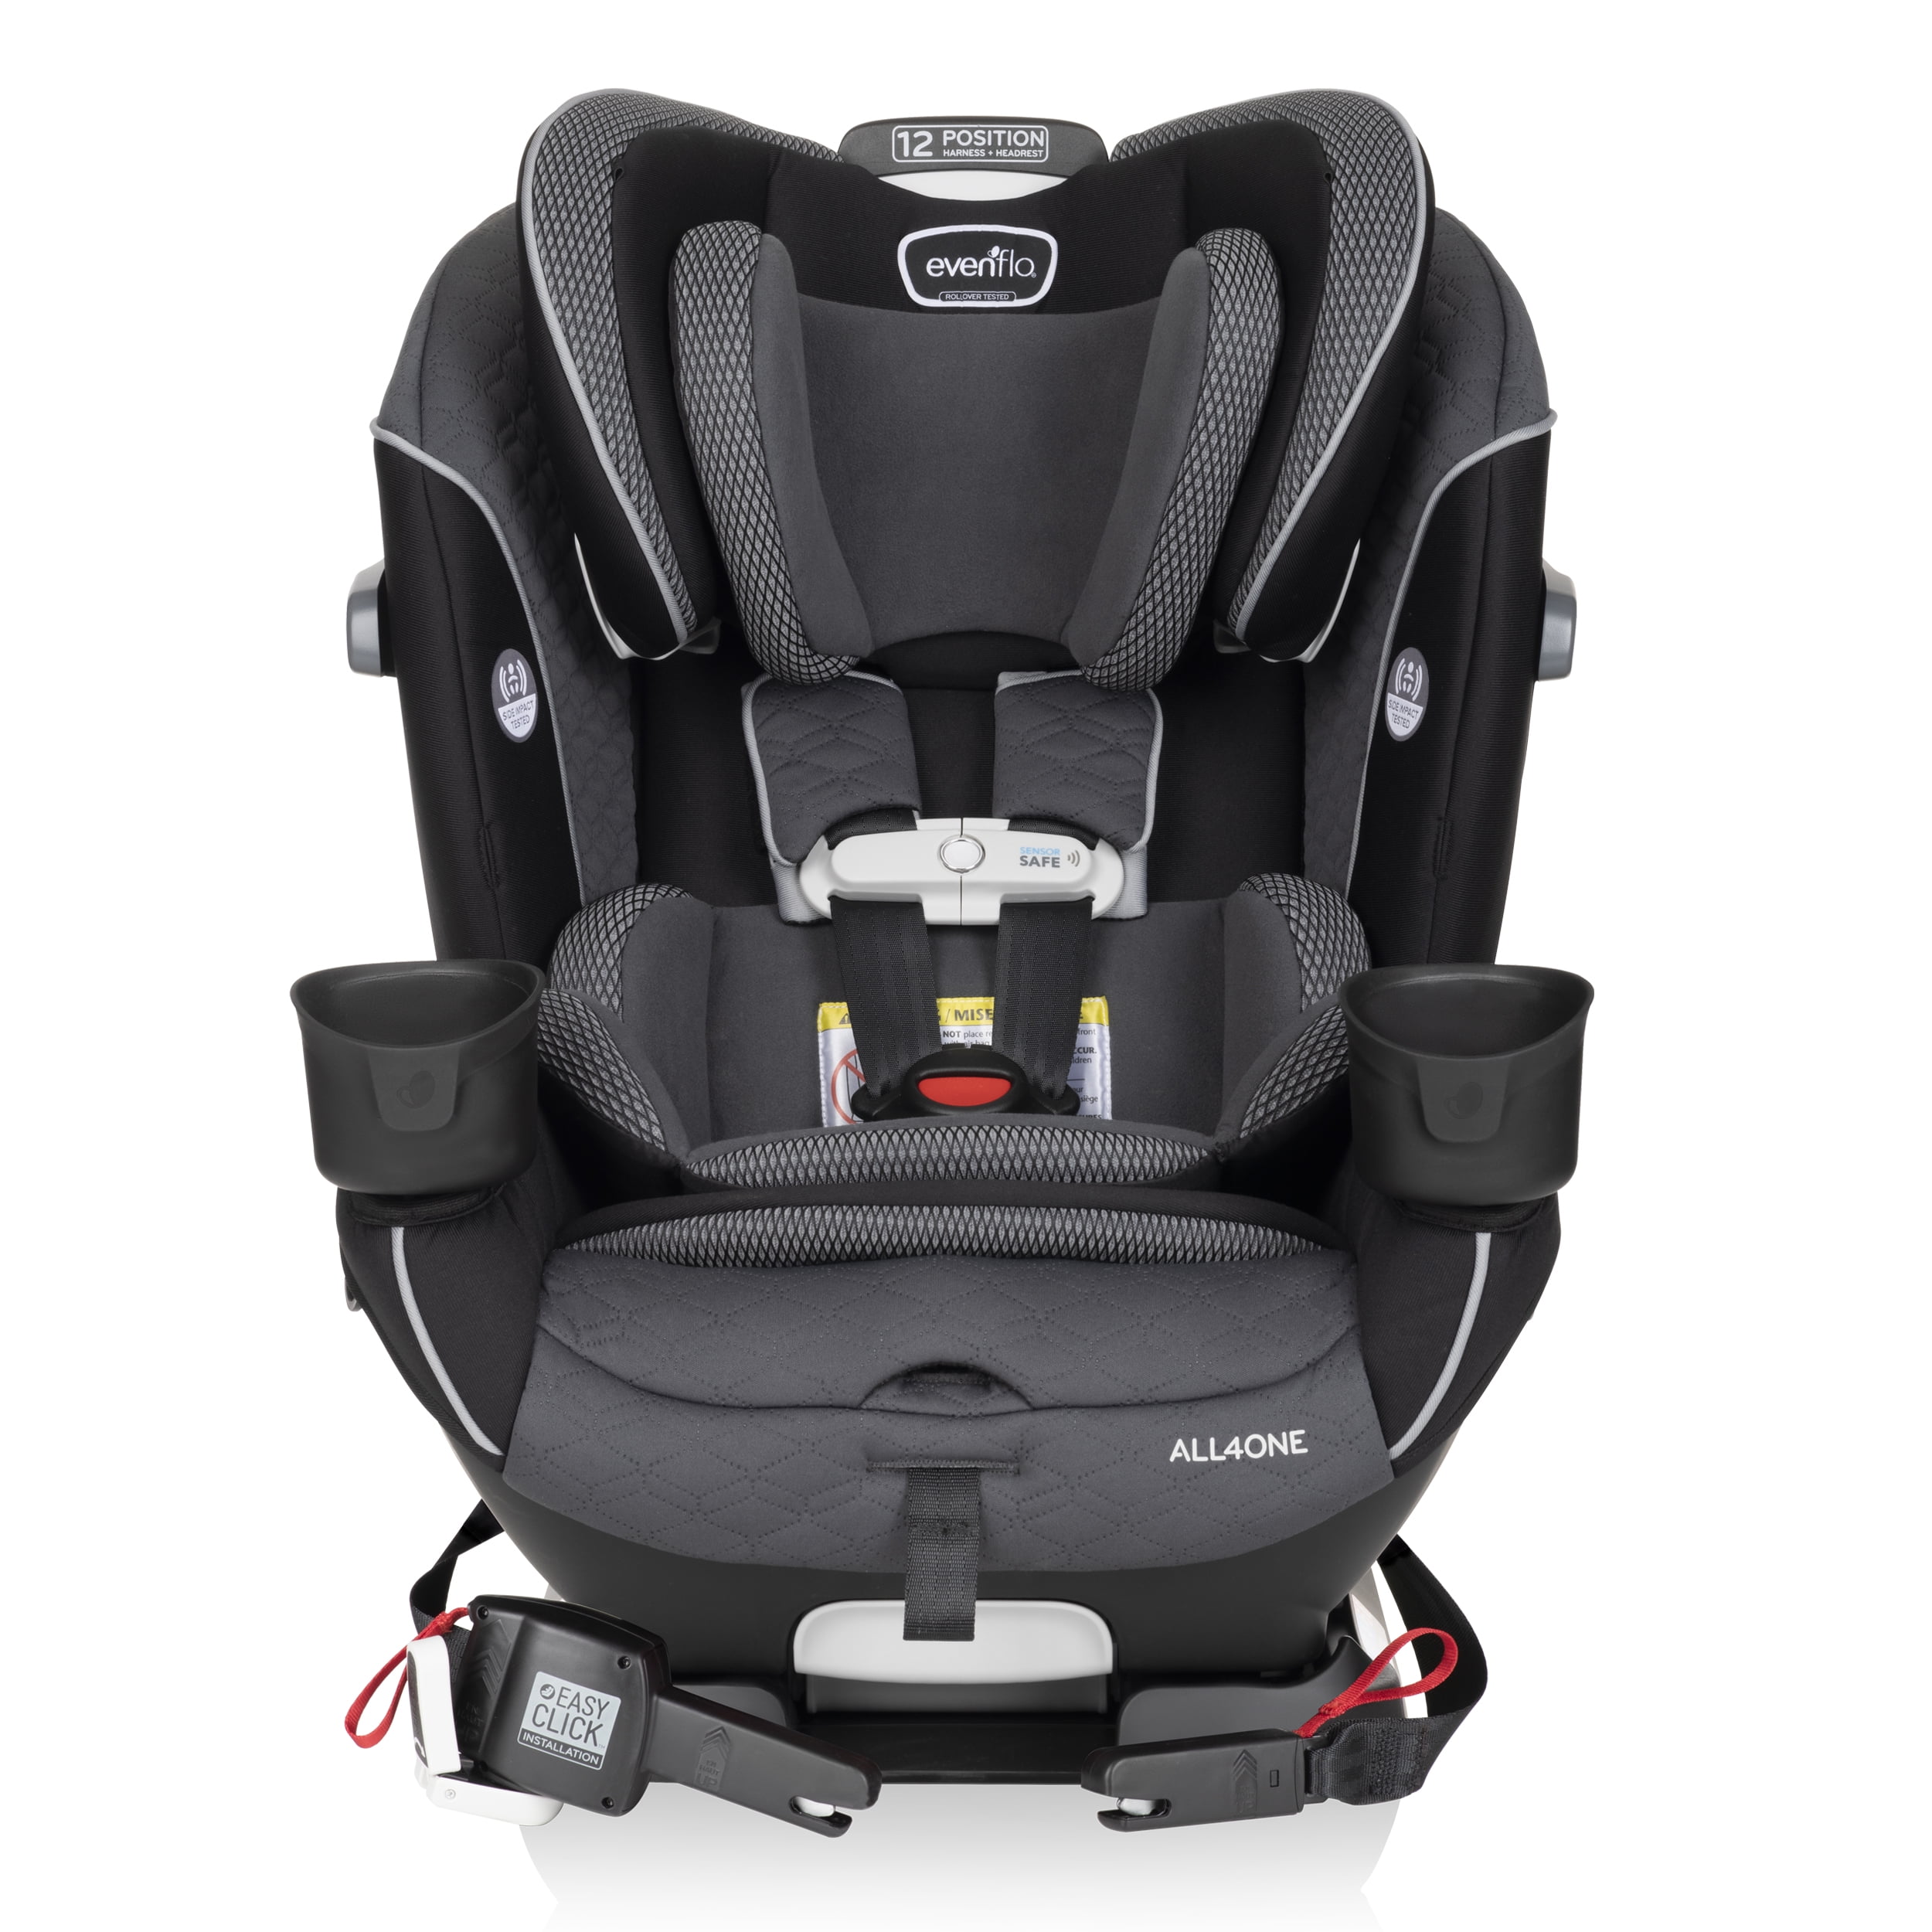 Evenflo All4One All-In-One Convertible Car Seat with SensorSafe (Aries Black)